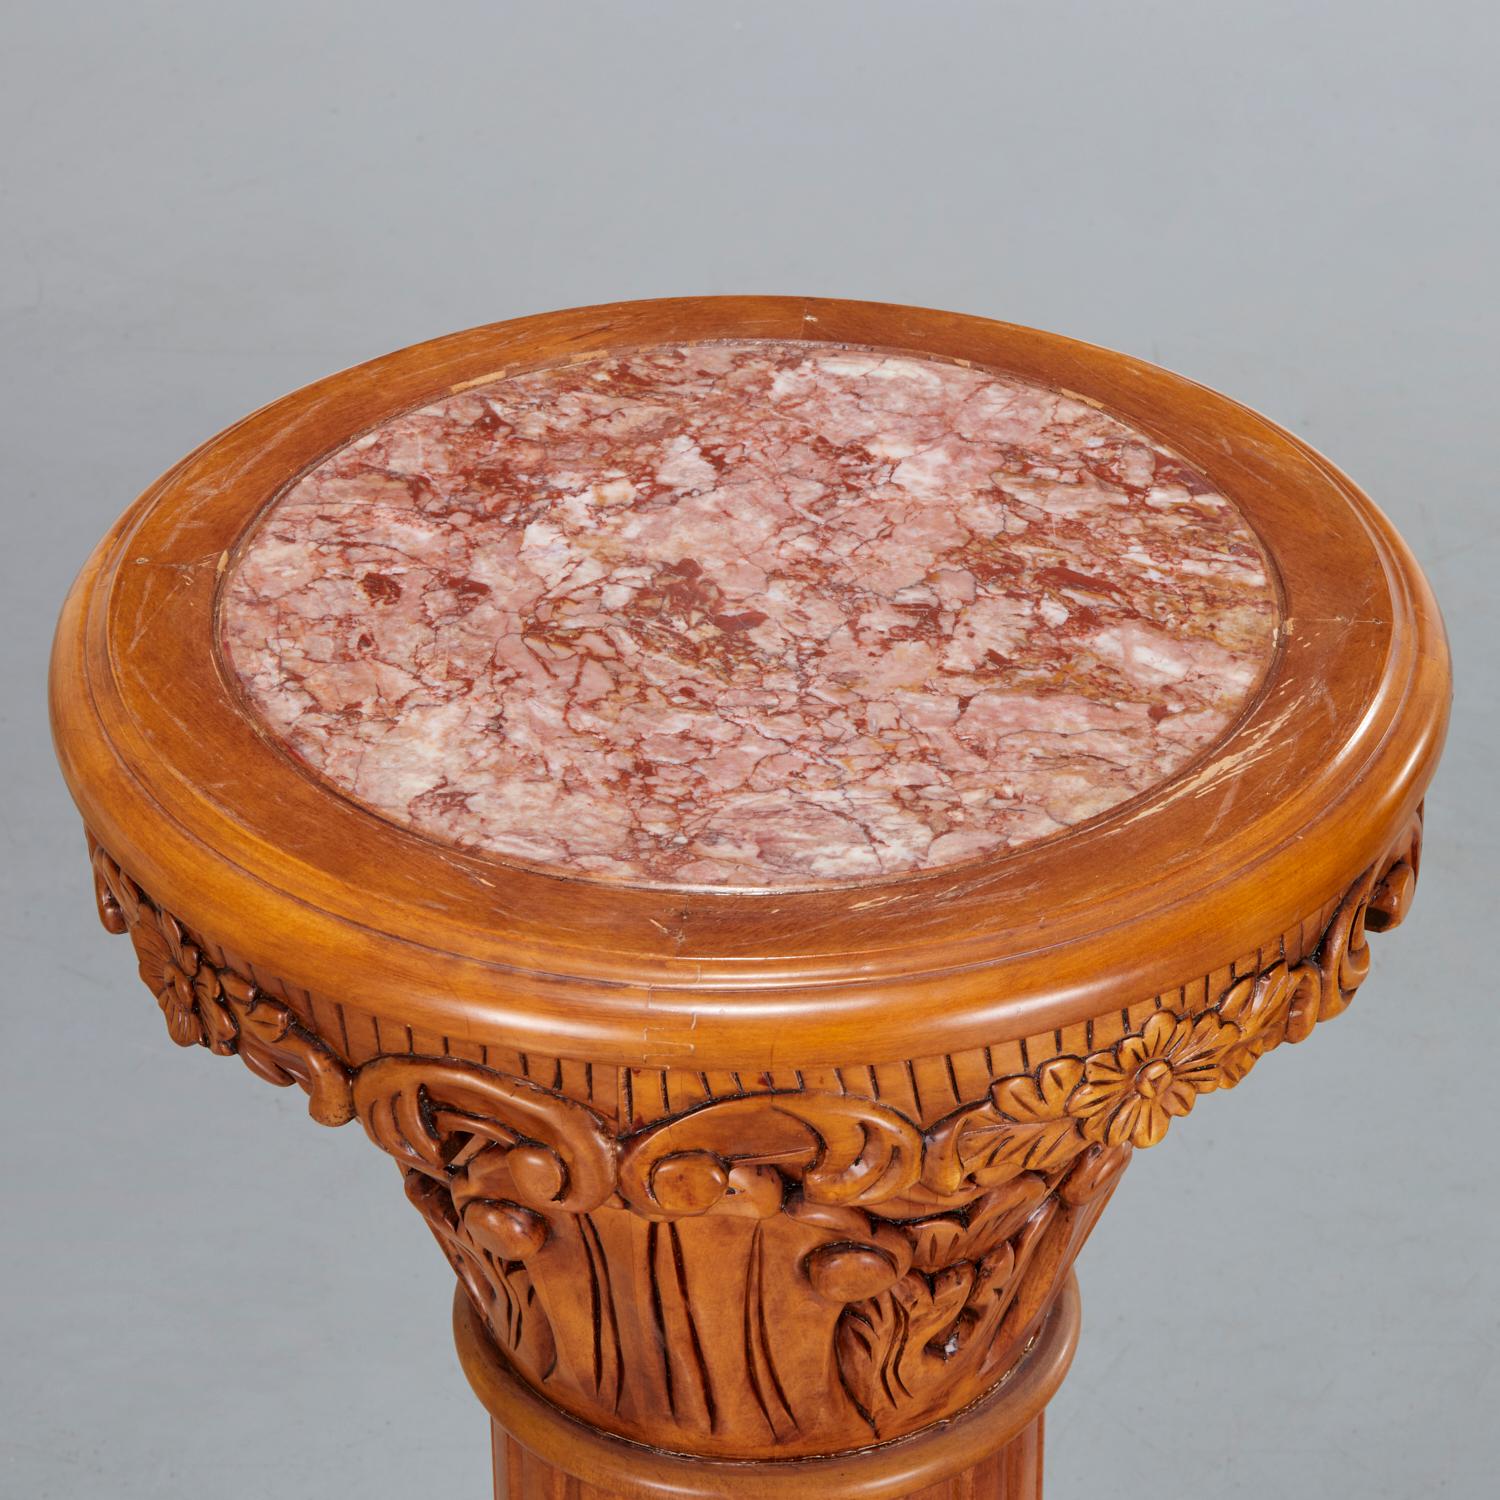 A pair of 20th c., side tables/stands, the round top with inset rouge breche marble, above a foliate carved capital on a fluted column. These tables/stands are richly carved and are quite decorative. Given their height and width they are very